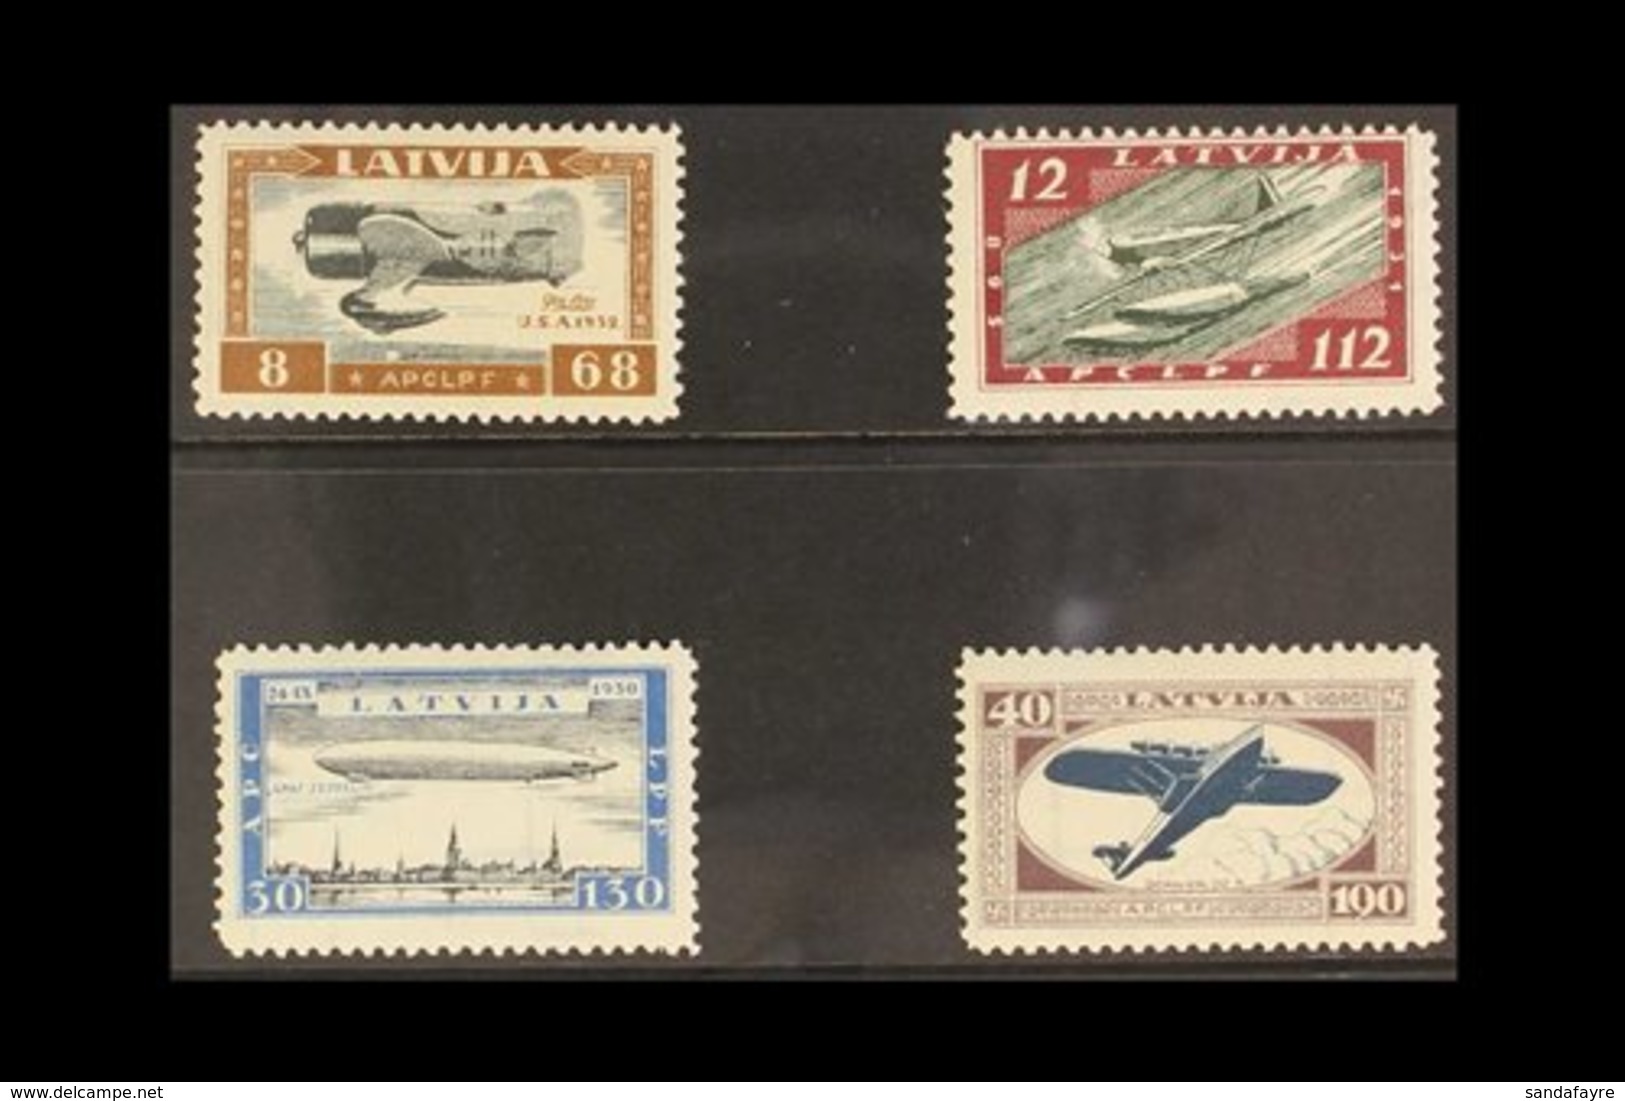 1933 Air Charity "Wounded Latvian Airmen Fund" Perforated Set, SG 243A/46A, Mi 228A/31A, Fine Mint (4 Stamps) For More I - Latvia